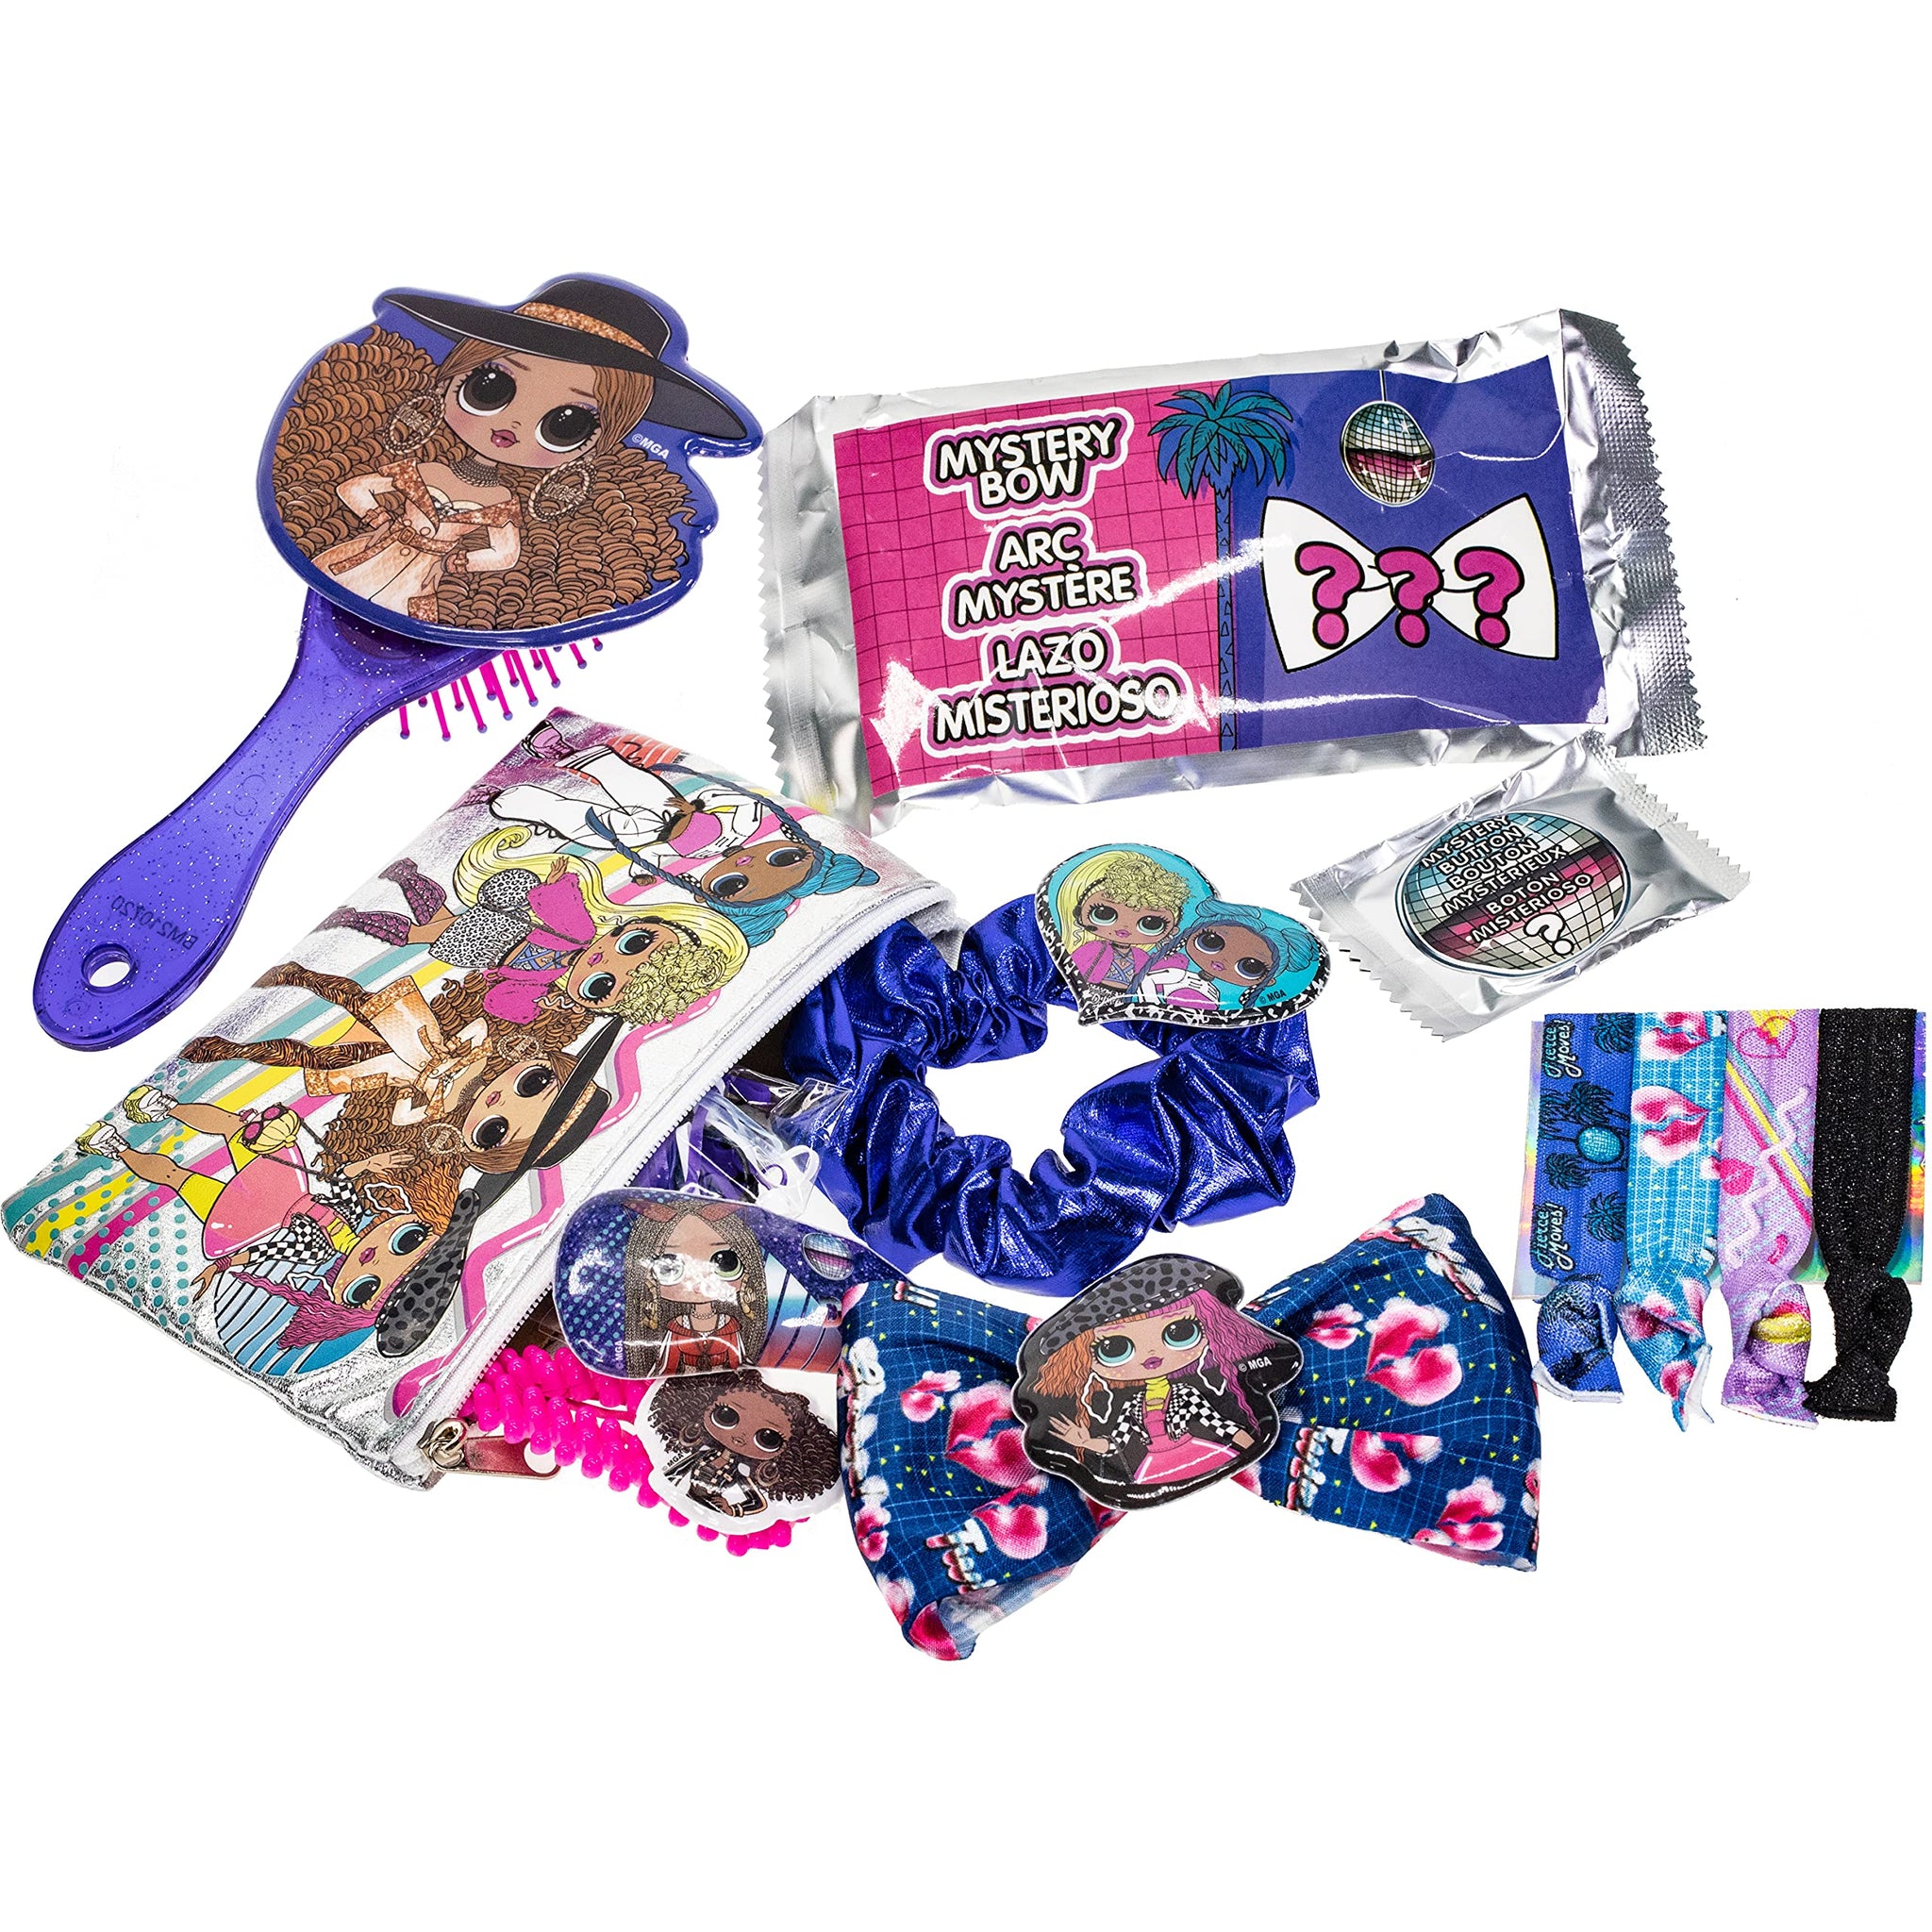 LOL Surprise! Townley Girl Hair Accessories Box|Gift Set for Kids  Girls|Ages 5+ (5 Pcs) Including Hair Bow, Hair scrunchie & Brush, Button  Pin & More